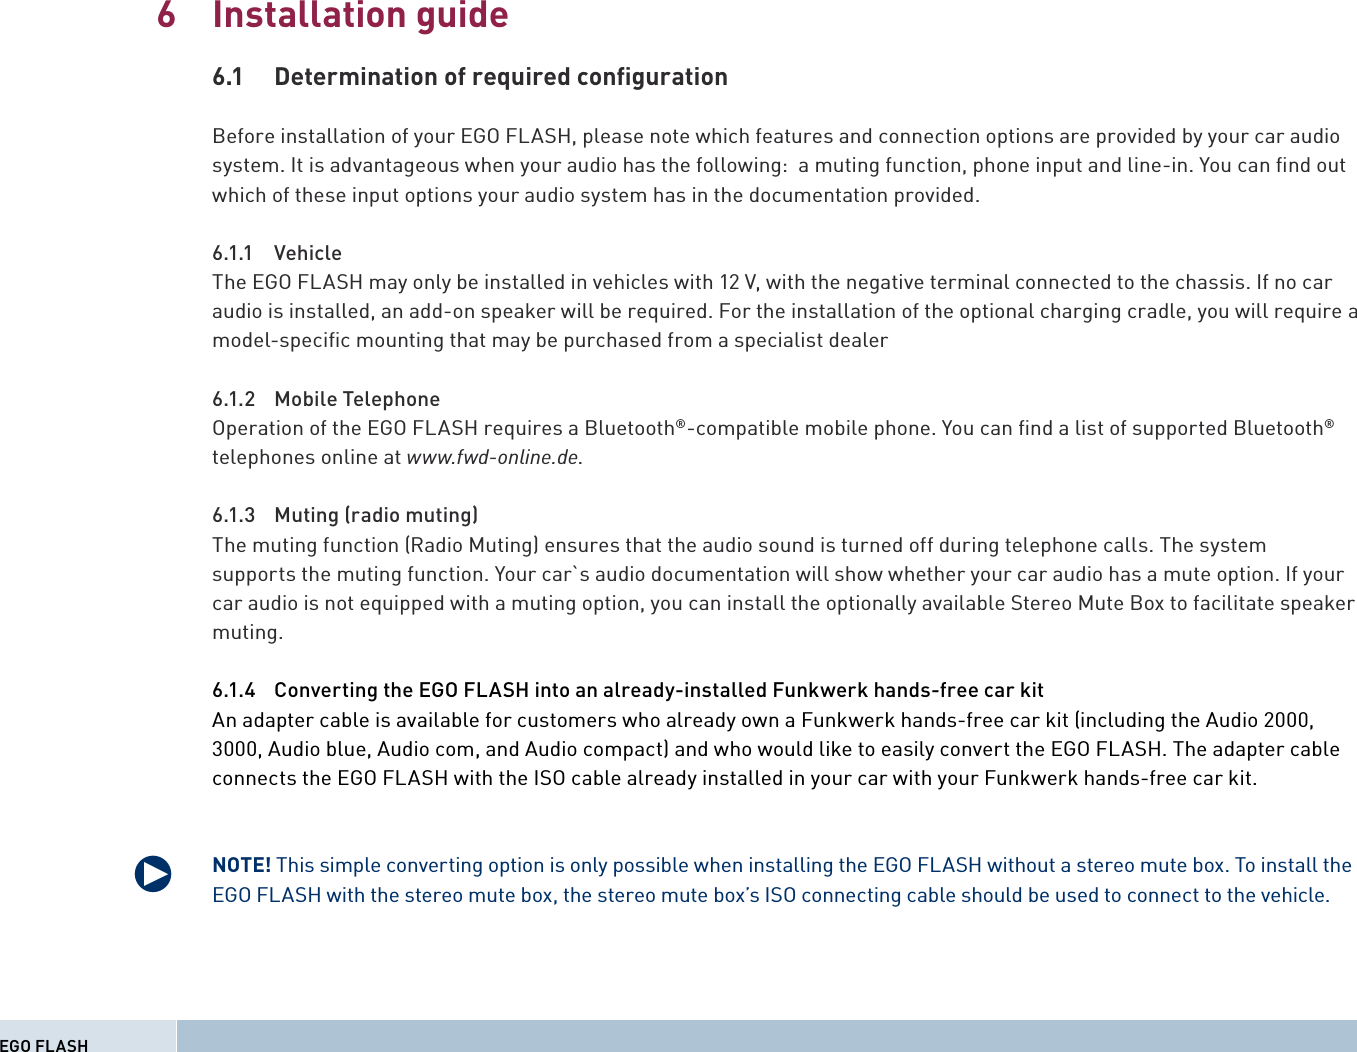 Installation guide6.1  Determination of required conﬁ gurationBefore installation of your EGO FLASH, please note which features and connection options are provided by your car audio system. It is advantageous when your audio has the following:  a muting function, phone input and line-in. You can ﬁ nd out which of these input options your audio system has in the documentation provided.6.1.1 VehicleThe EGO FLASH may only be installed in vehicles with 12 V, with the negative terminal connected to the chassis. If no car audio is installed, an add-on speaker will be required. For the installation of the optional charging cradle, you will require a model-speciﬁ c mounting that may be purchased from a specialist dealer6.1.2 Mobile TelephoneOperation of the EGO FLASH requires a Bluetooth®-compatible mobile phone. You can ﬁ nd a list of supported Bluetooth® telephones online at www.fwd-online.de.6.1.3  Muting (radio muting) The muting function (Radio Muting) ensures that the audio sound is turned off during telephone calls. The systemsupports the muting function. Your car`s audio documentation will show whether your car audio has a mute option. If your car audio is not equipped with a muting option, you can install the optionally available Stereo Mute Box to facilitate speaker muting.6.1.4  Converting the EGO FLASH into an already-installed Funkwerk hands-free car kitAn adapter cable is available for customers who already own a Funkwerk hands-free car kit (including the Audio 2000, 3000, Audio blue, Audio com, and Audio compact) and who would like to easily convert the EGO FLASH. The adapter cable connects the EGO FLASH with the ISO cable already installed in your car with your Funkwerk hands-free car kit.NOTE! This simple converting option is only possible when installing the EGO FLASH without a stereo mute box. To install the EGO FLASH with the stereo mute box, the stereo mute box’s ISO connecting cable should be used to connect to the vehicle.6EGO FLASHq